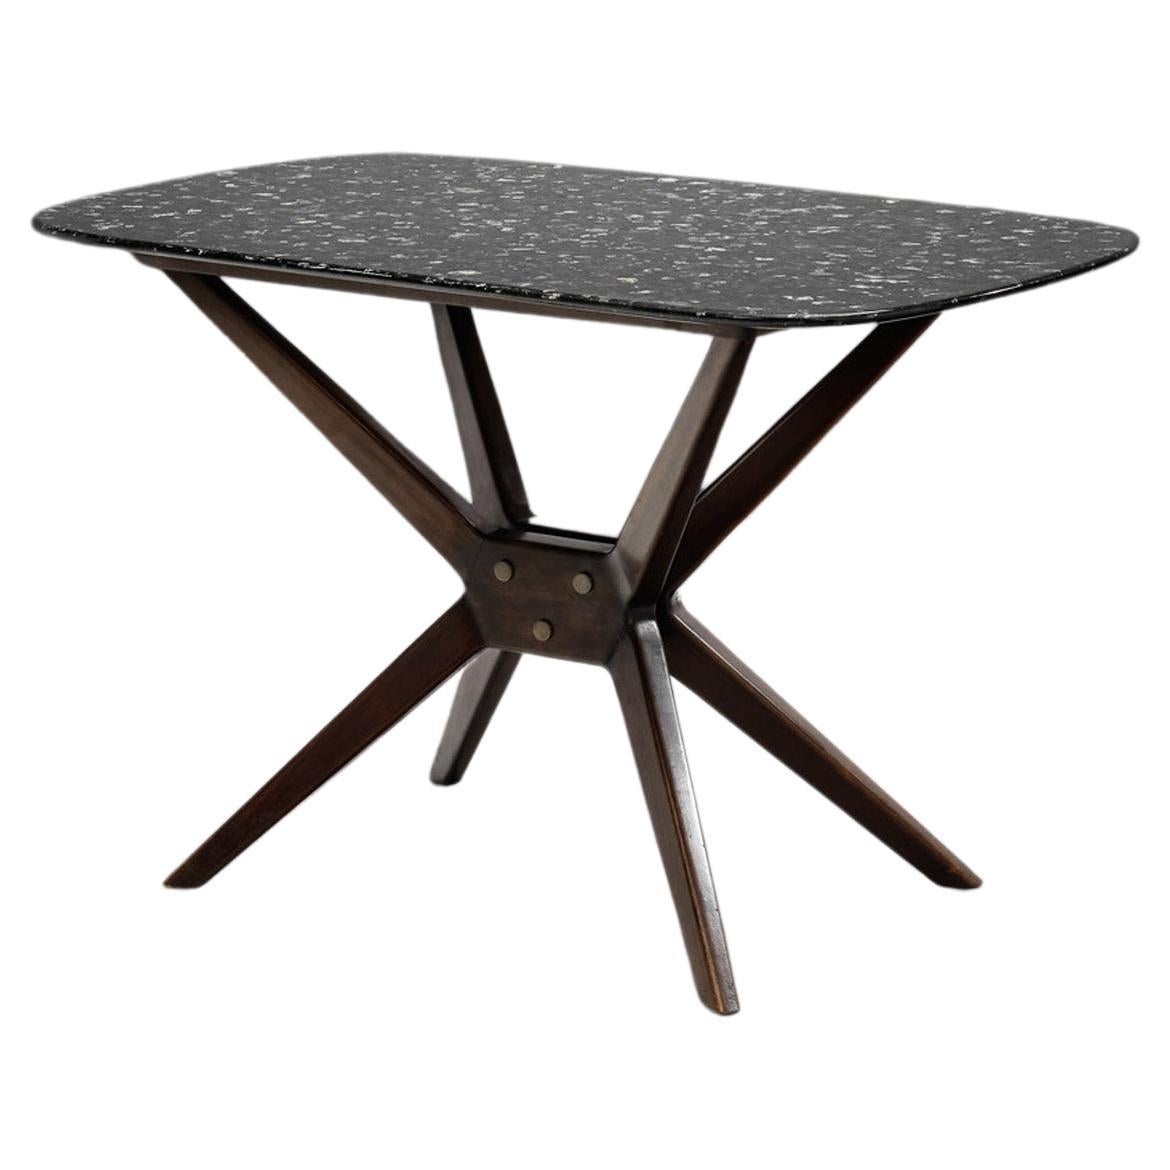 Swedish Wooden Table with Oblique Legs and Stone Top, Sweden, circa 1960s